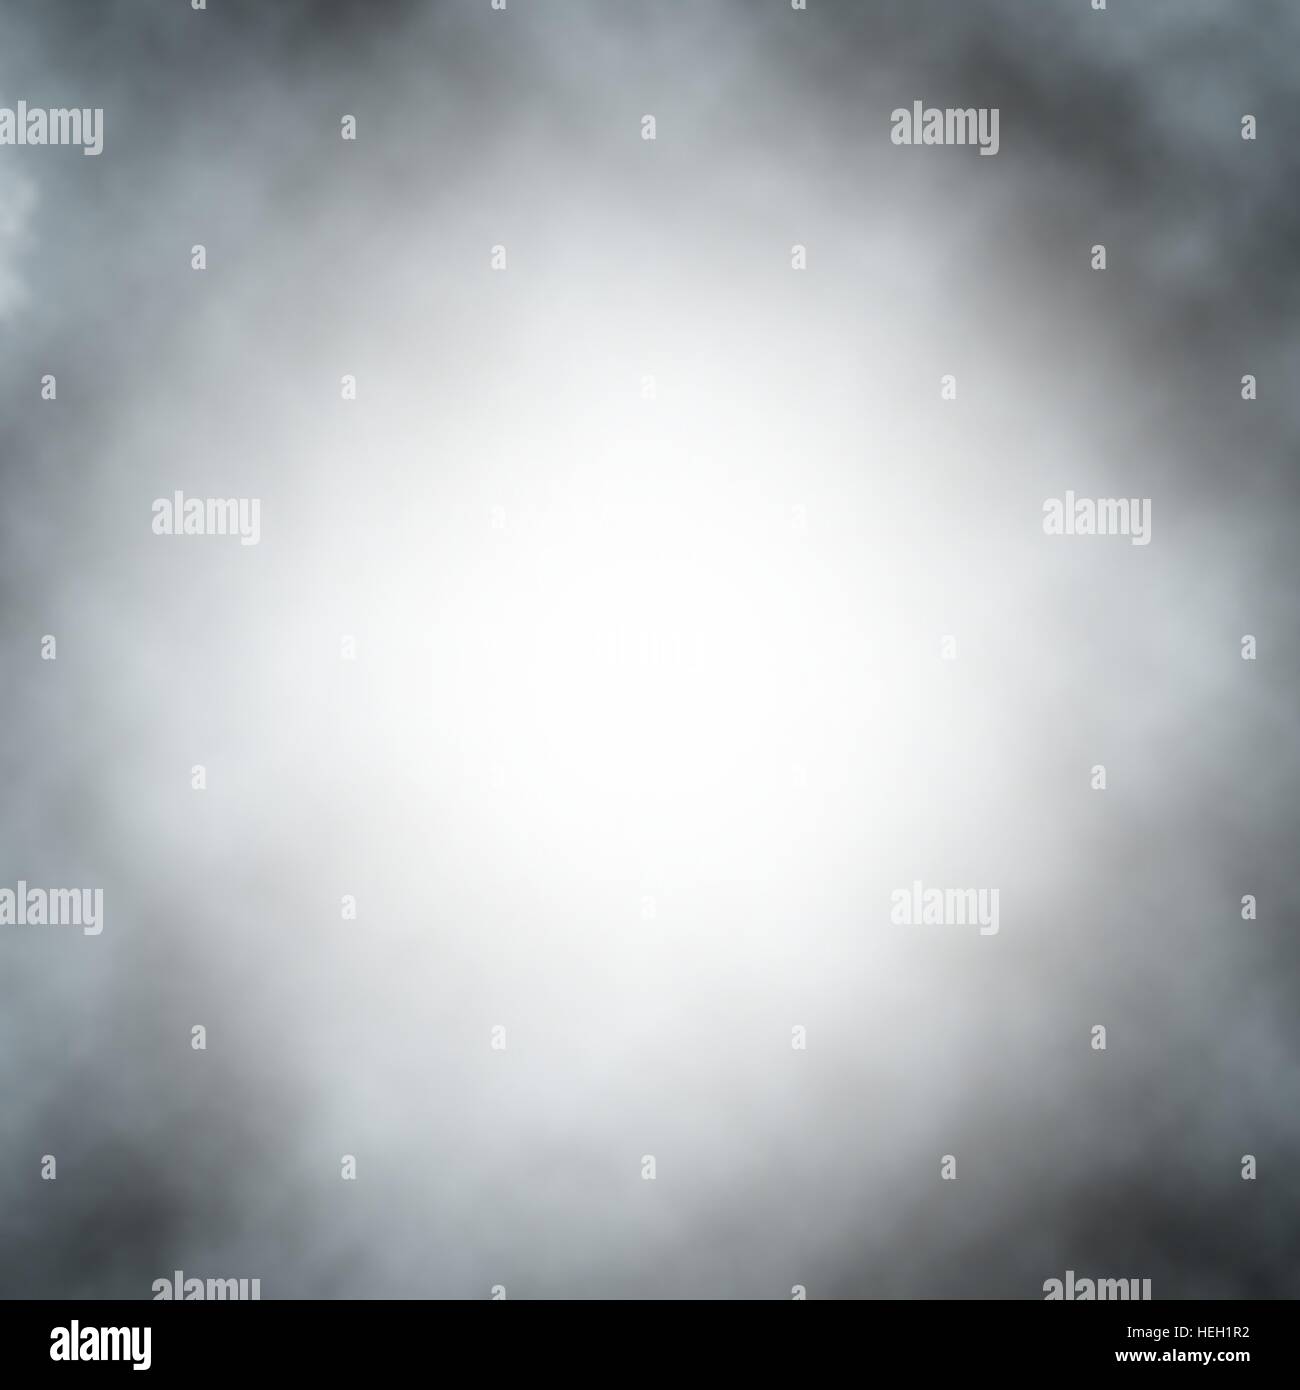 Vector background of gray fog or clouds made using a gradient mesh Stock Vector